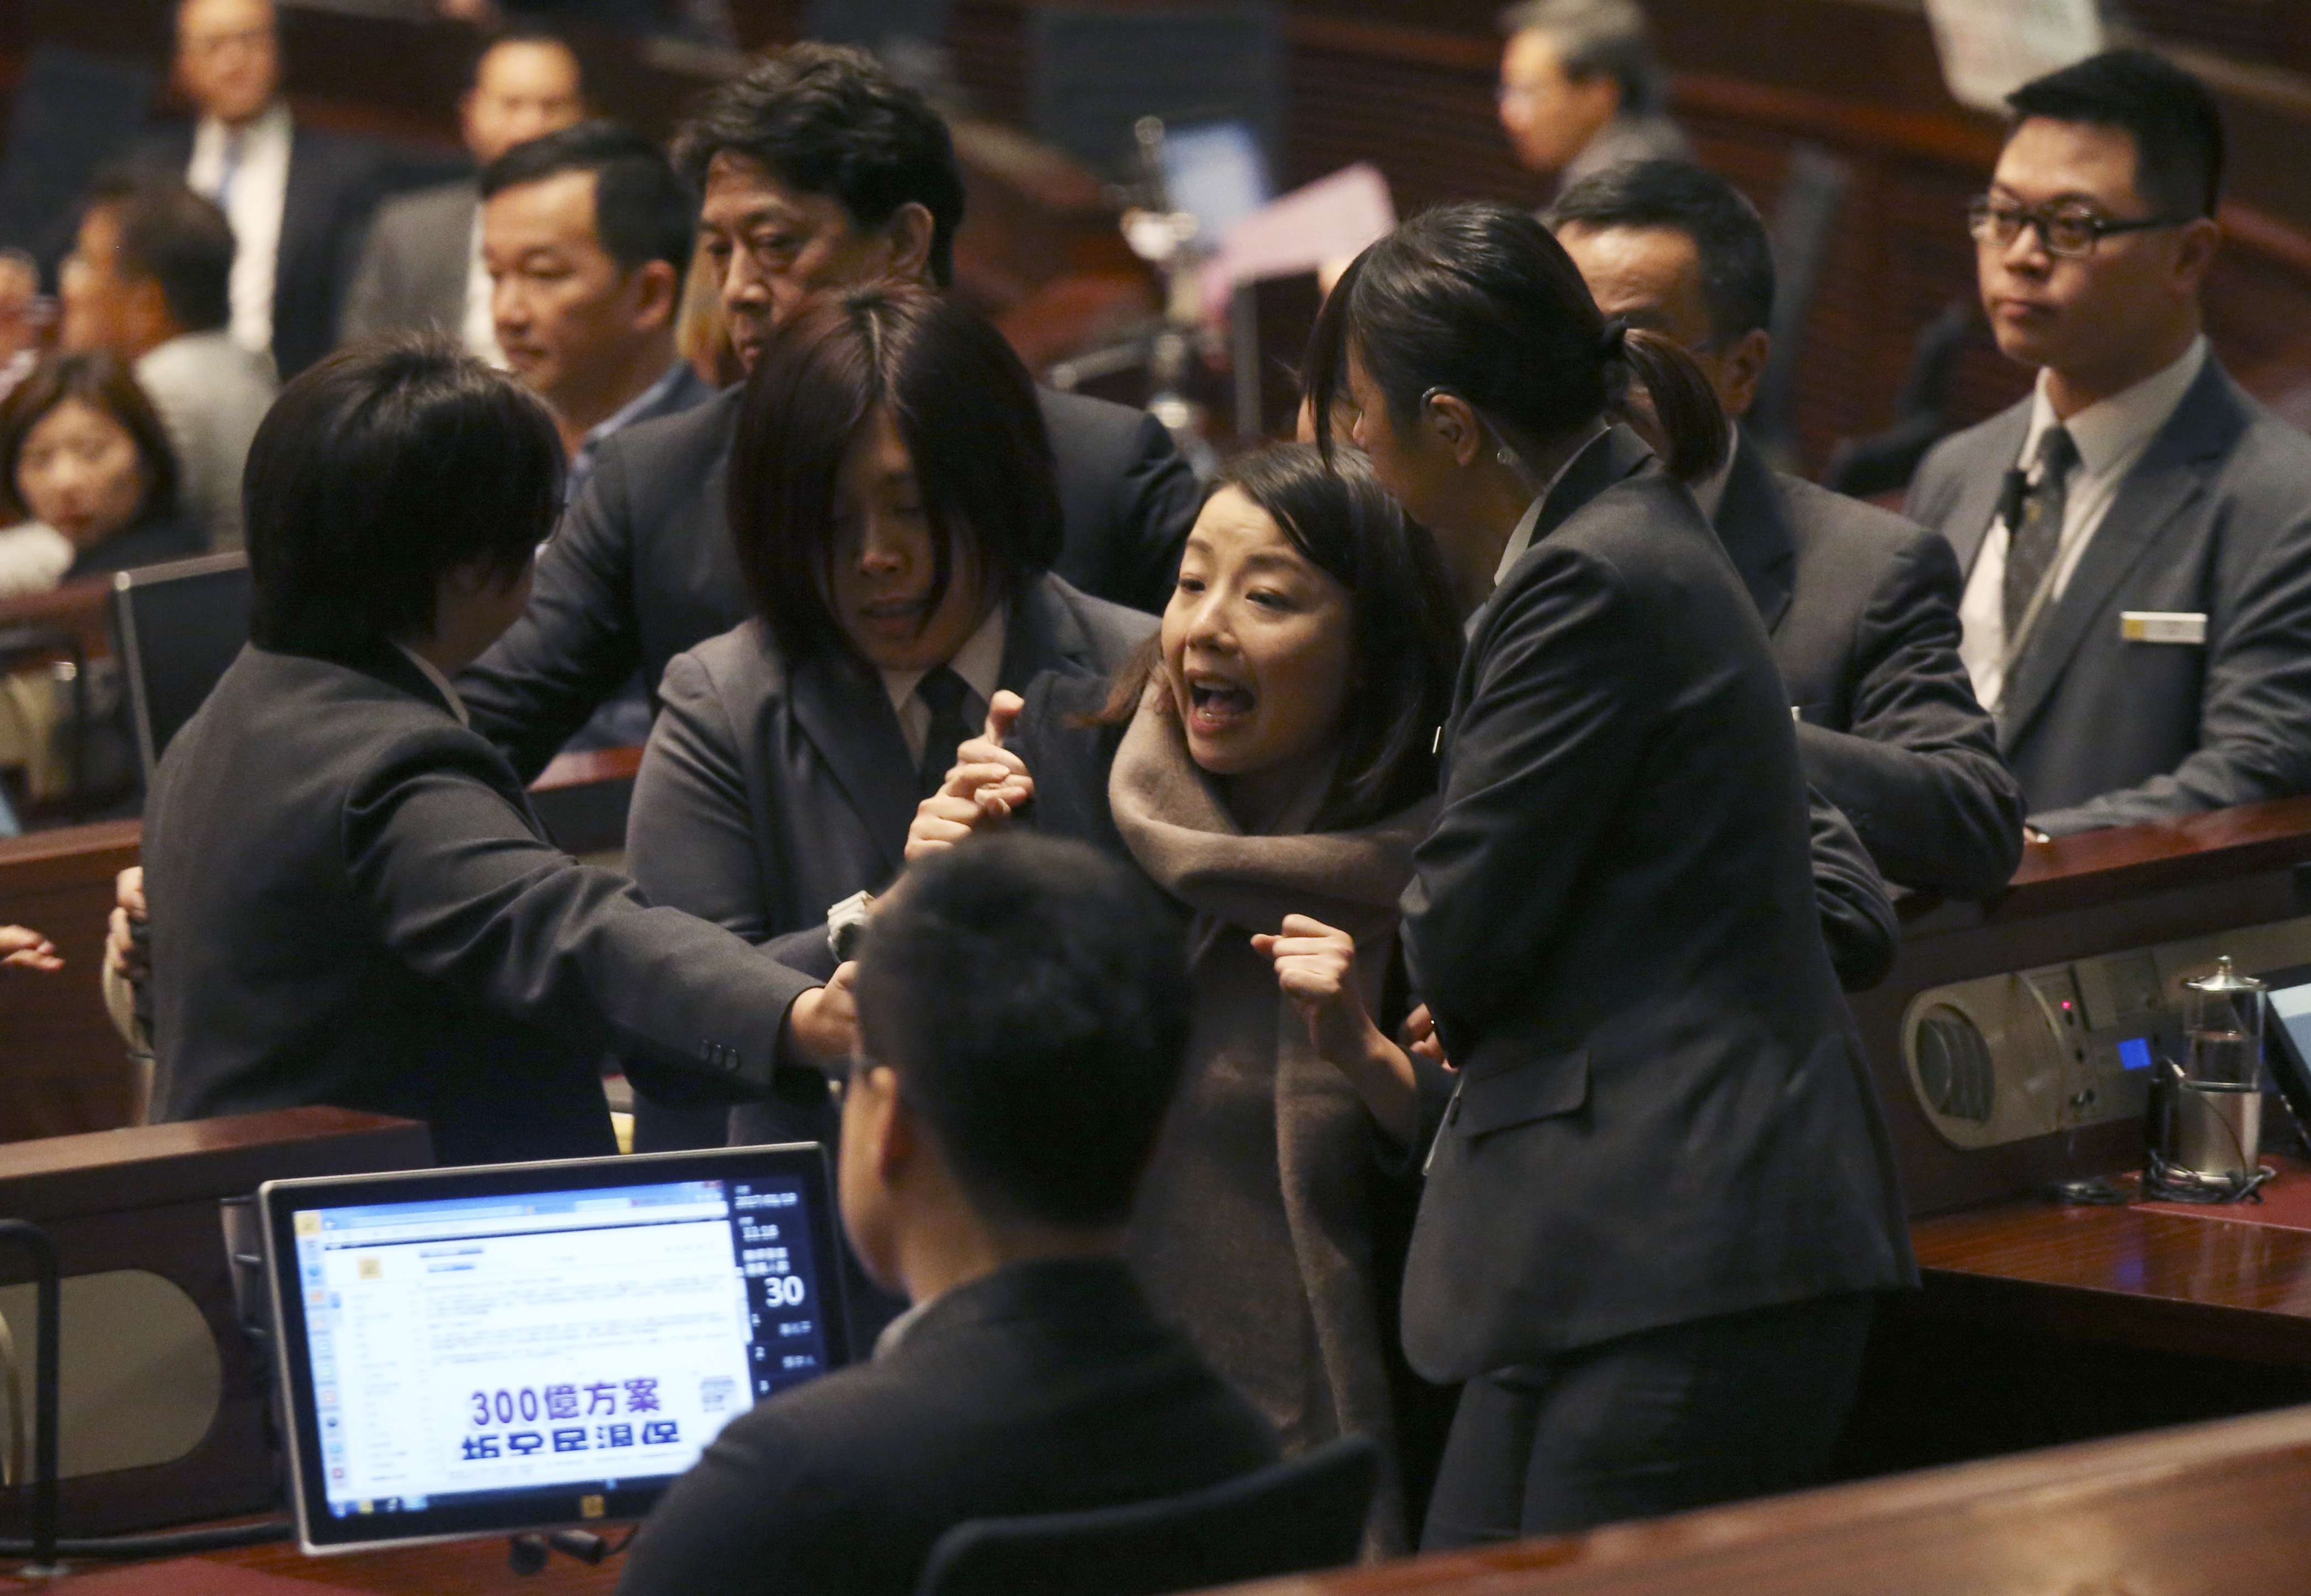 Legislator Lau Siu-lai was expelled from the chamber for playing a video during the chief executive’s question-and-answer session following his policy address last month. Photo: K. Y. Cheng